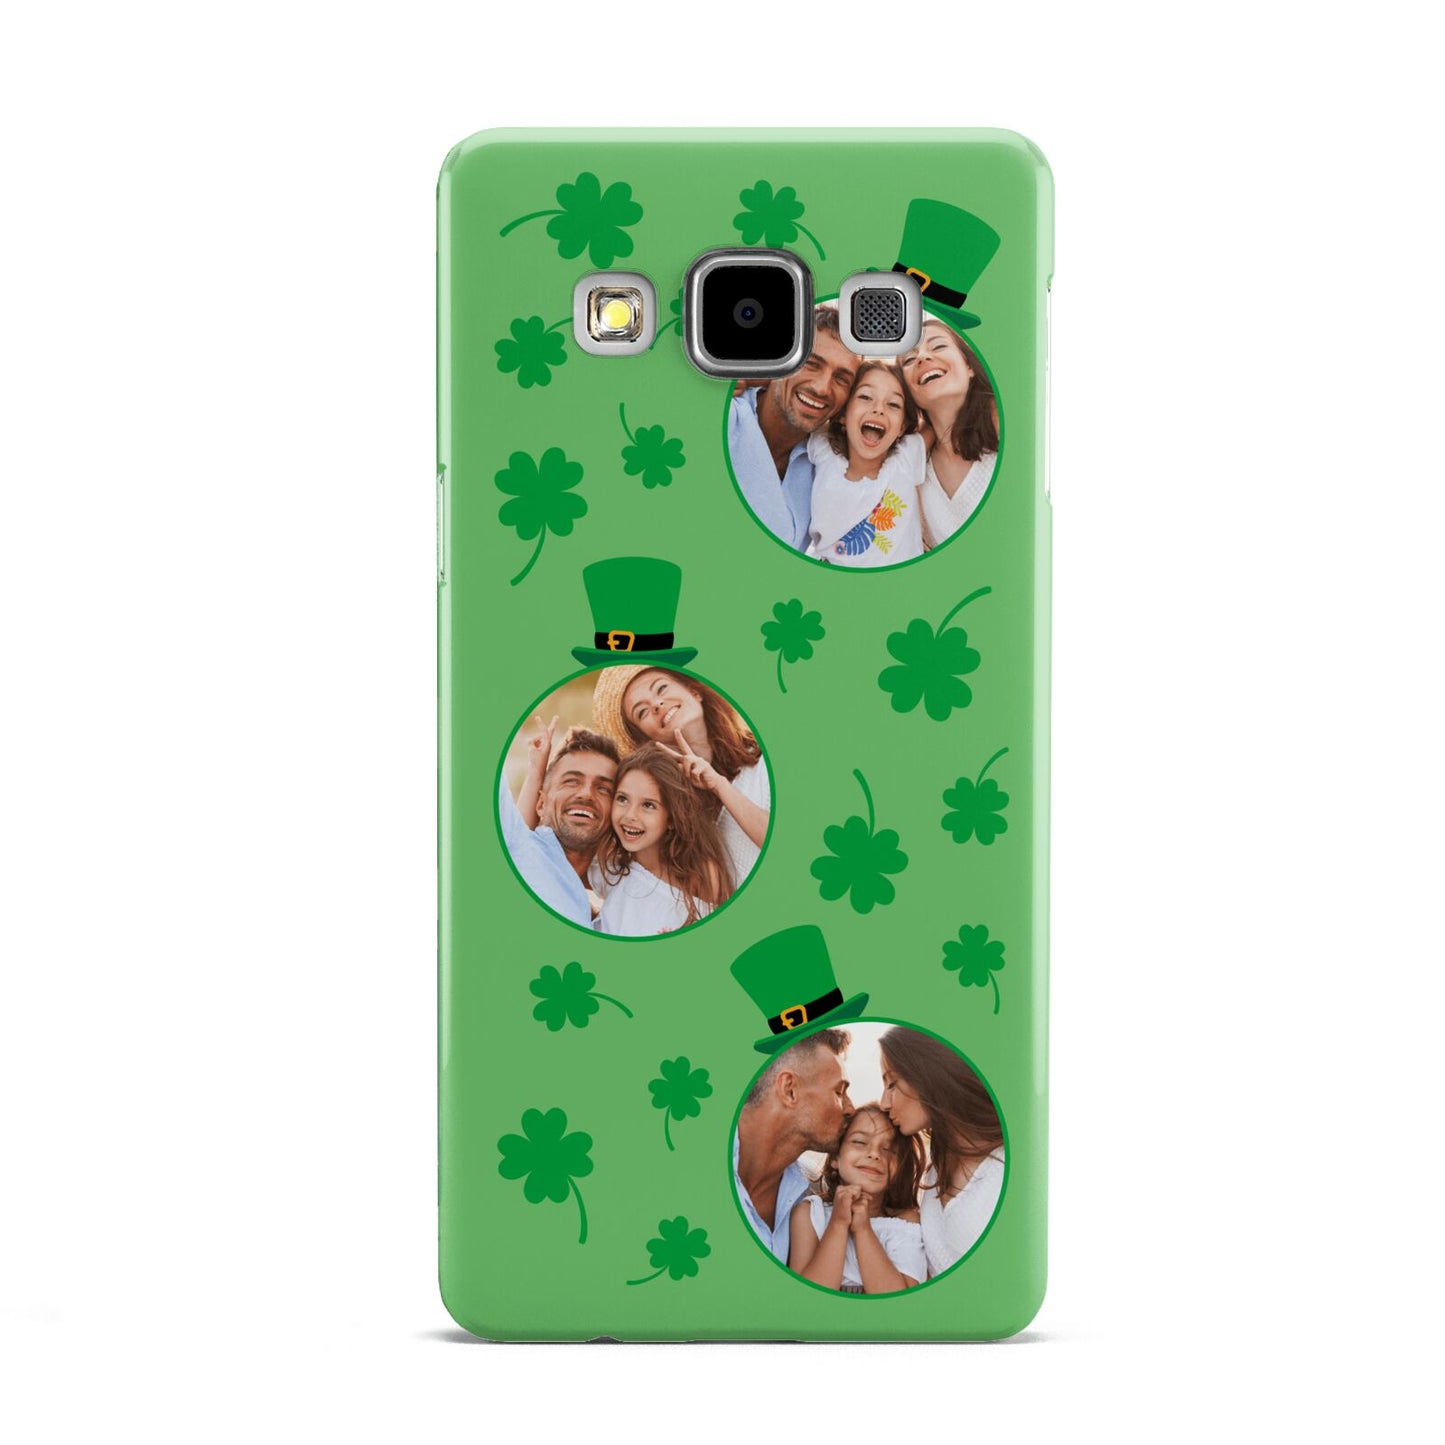 St Patricks Day Personalised Photo Samsung Galaxy A5 Case